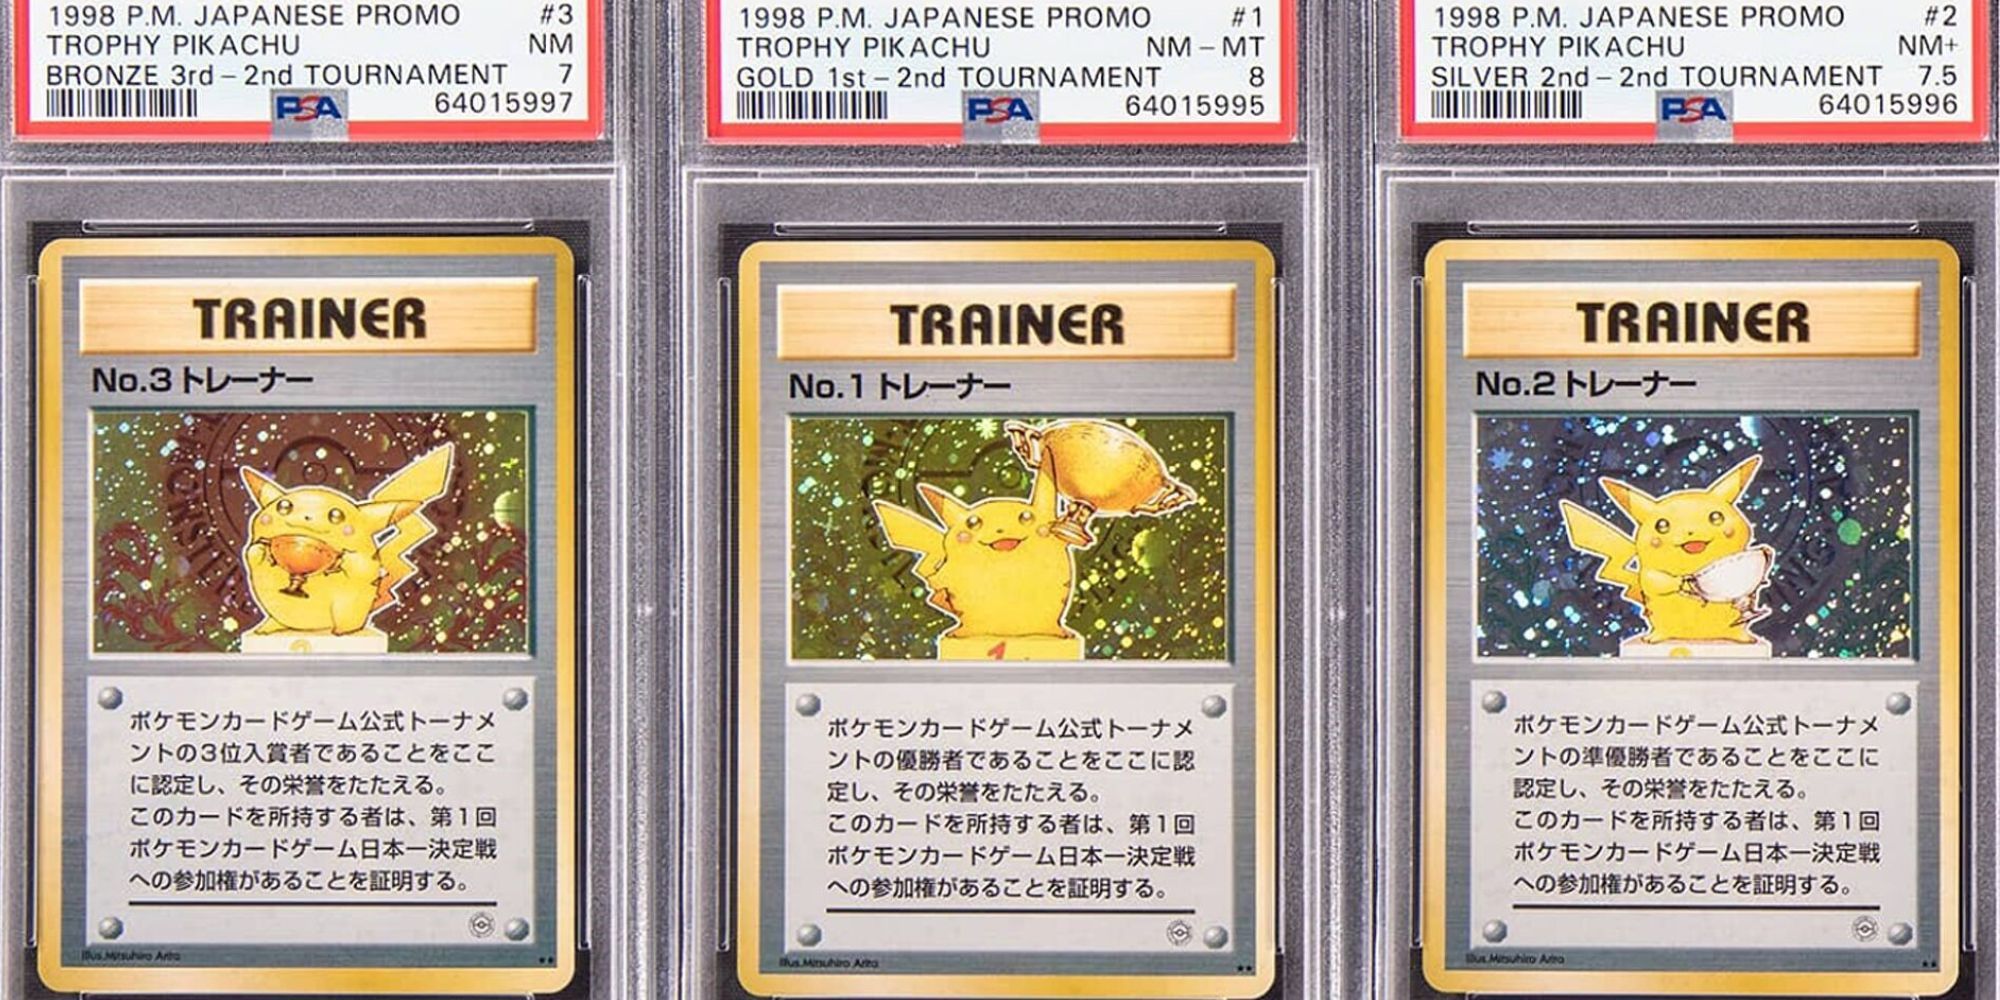 Trophy Pikachu Gold 1st 2nd and 3rd cards